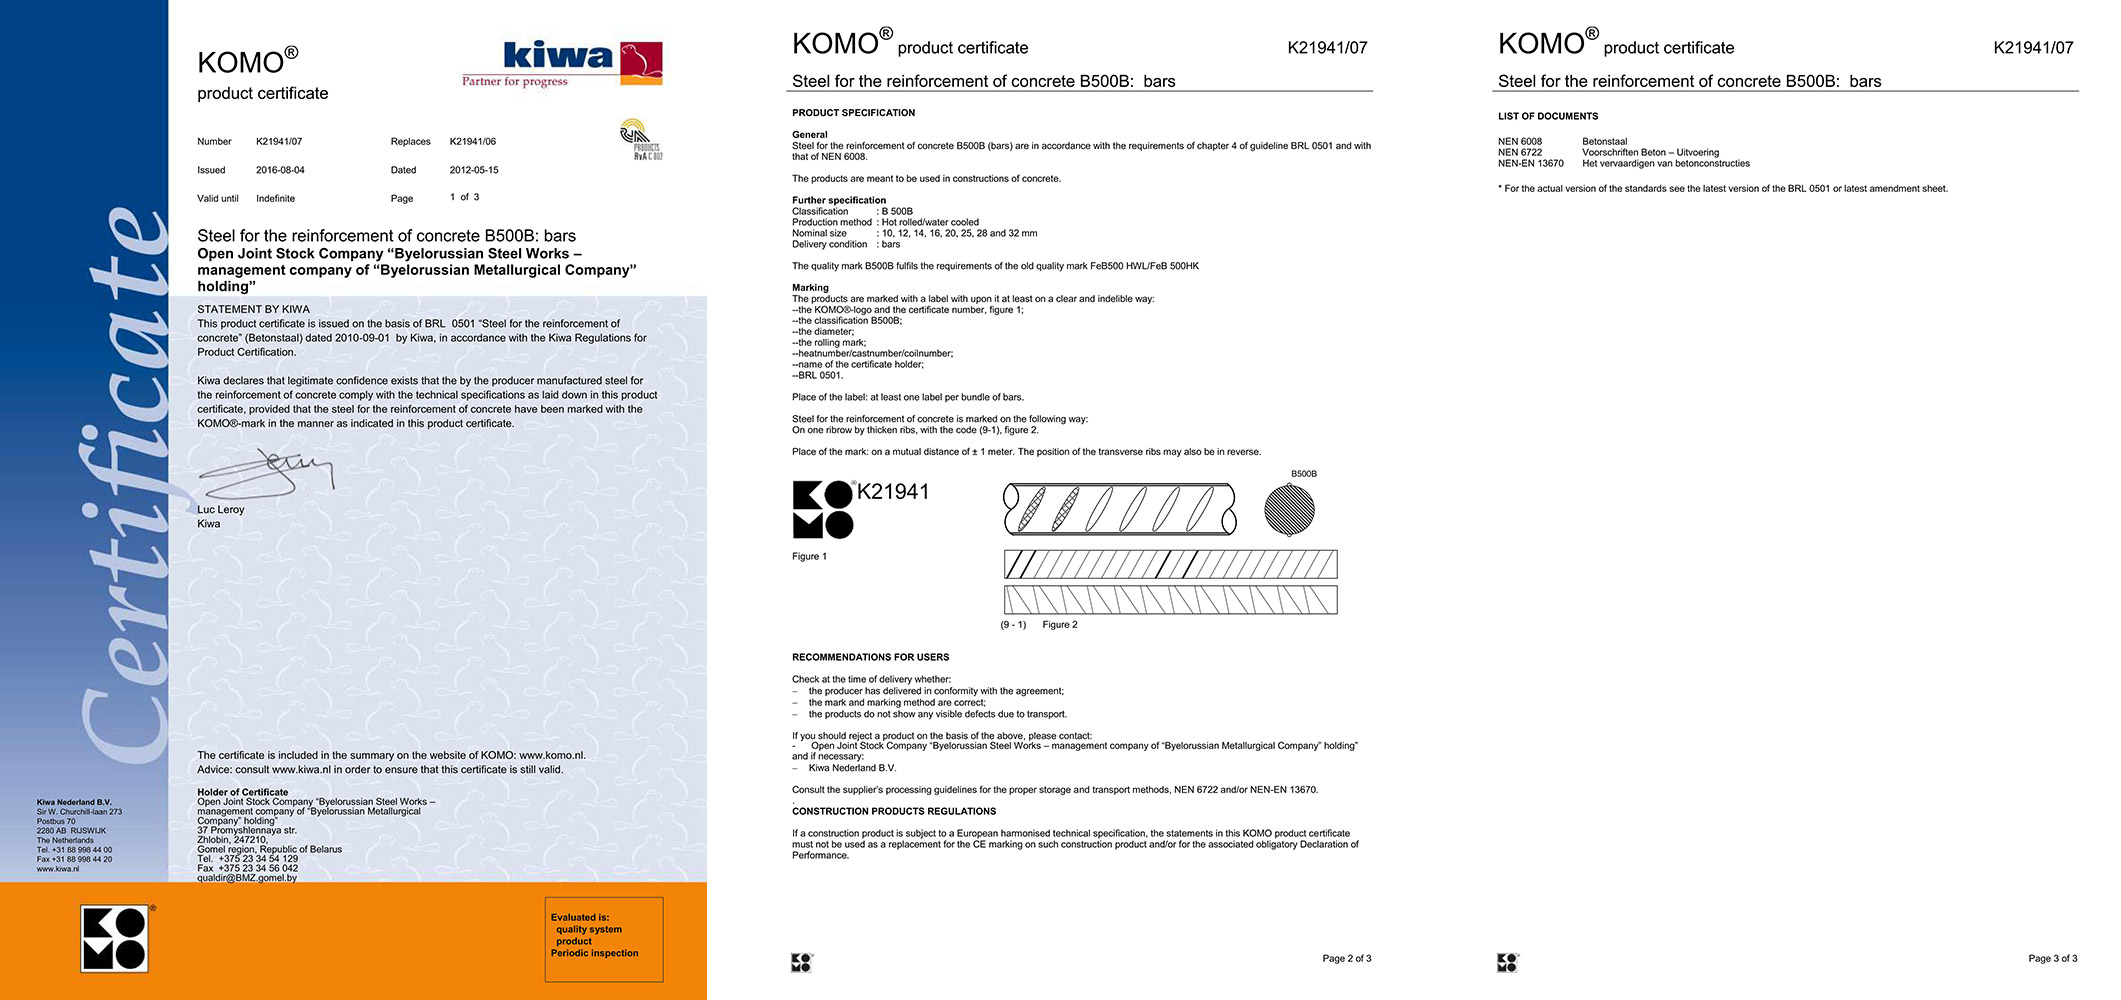 Certificate KIWA, Holland, No. K21941/07 for production of reinforcement steel B500B ø 10-32 mm in conformity with BRL 0501 and standard NEN 6008